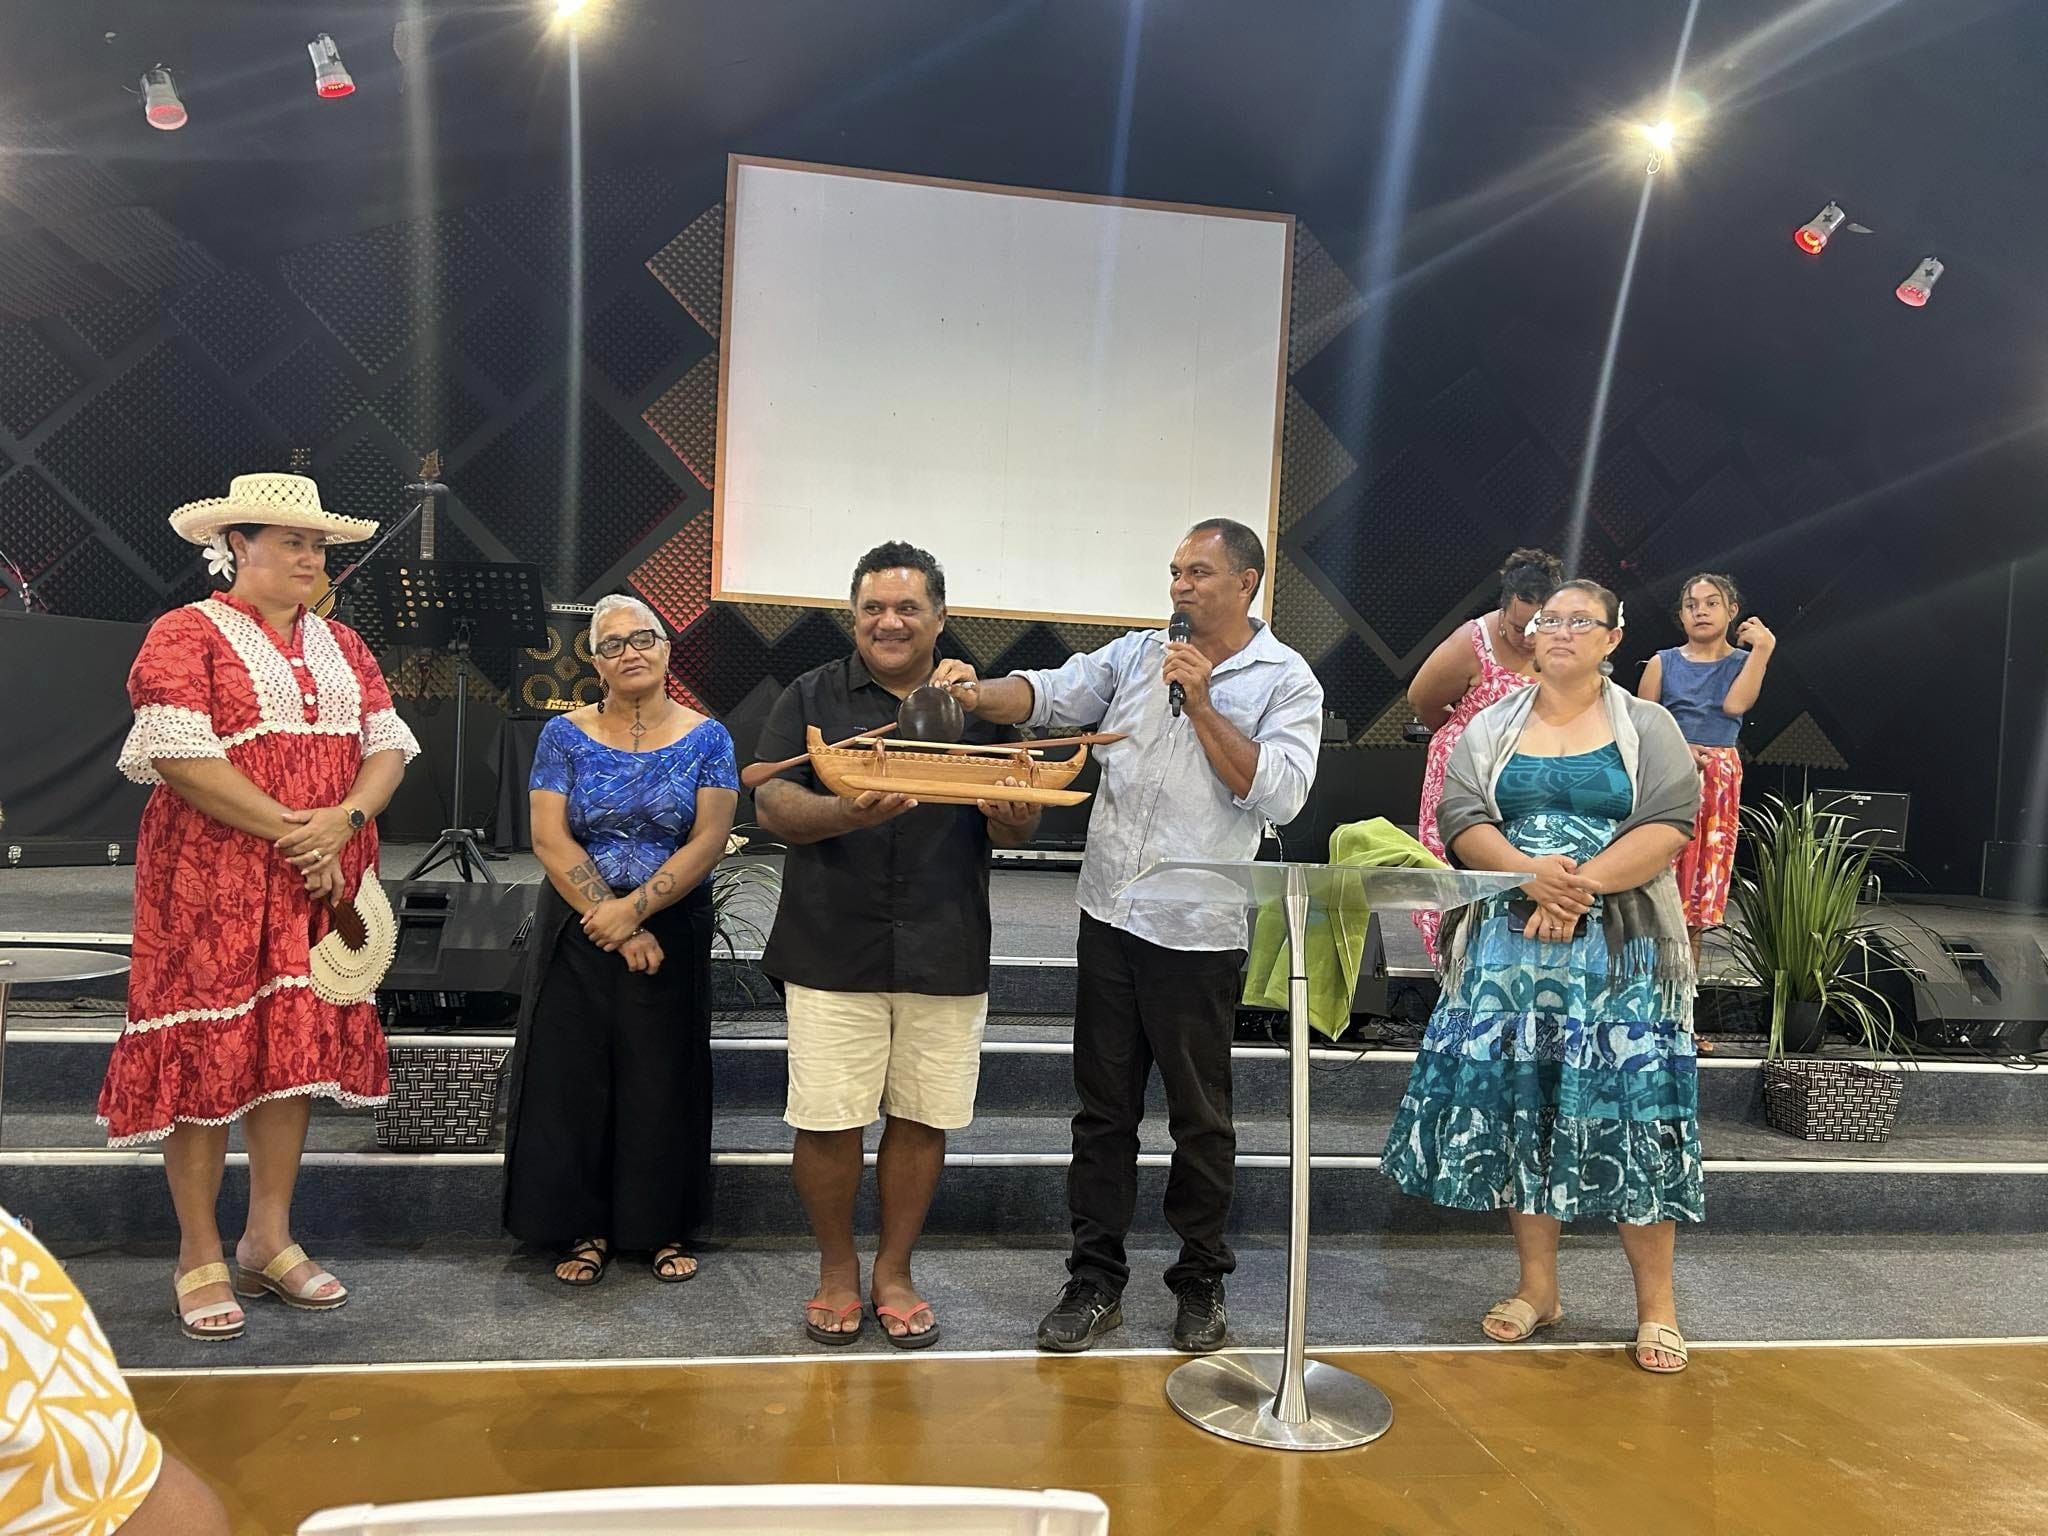 Cook Islands Assembly of God celebrates 50 years of faith